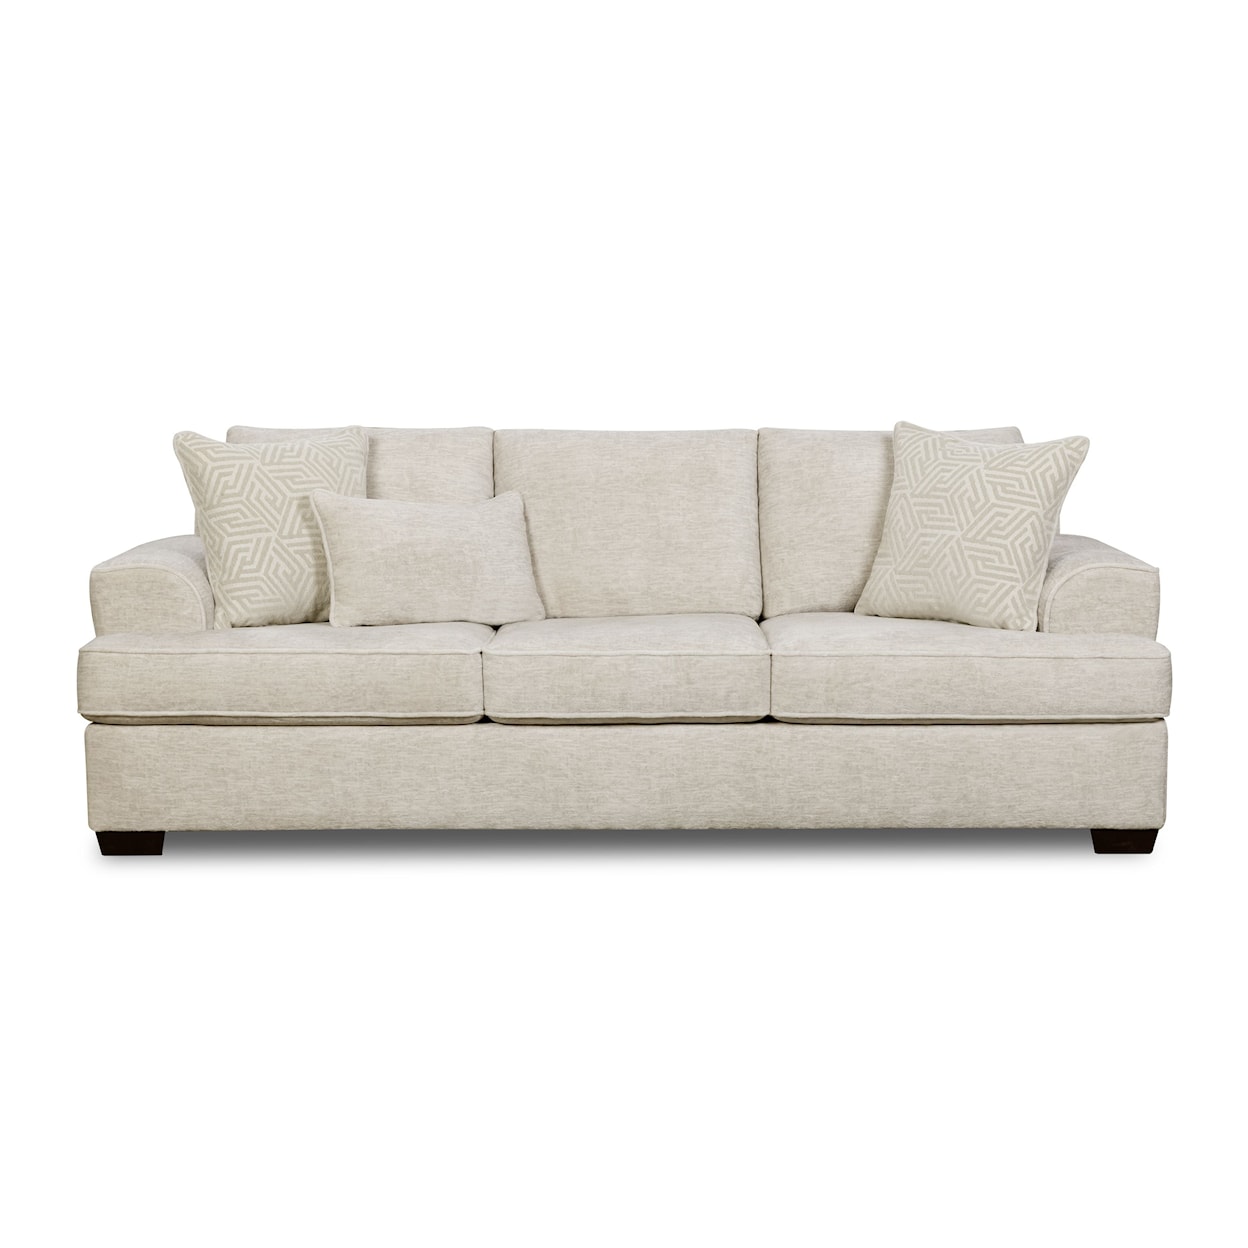 Behold Home 2580 Ritzy Sofa